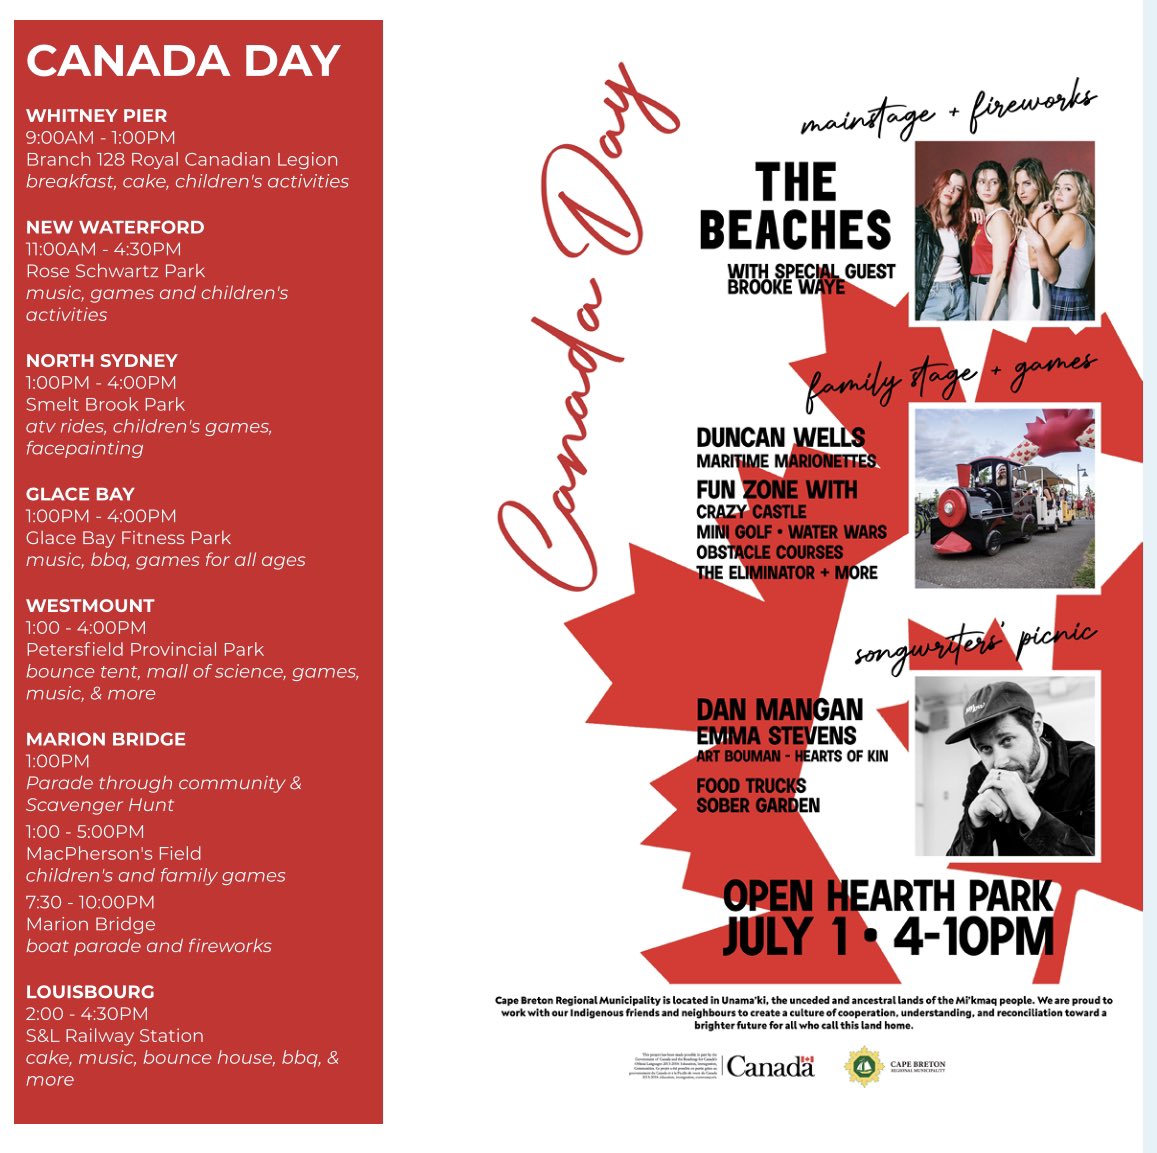 Happy, happy Canada day! The sun is shining and volunteers around the municipality are gearing up to celebrate the day away. Heading out shortly to hit up some of the fun. Enjoy you day folks 🇨🇦🍁♥️